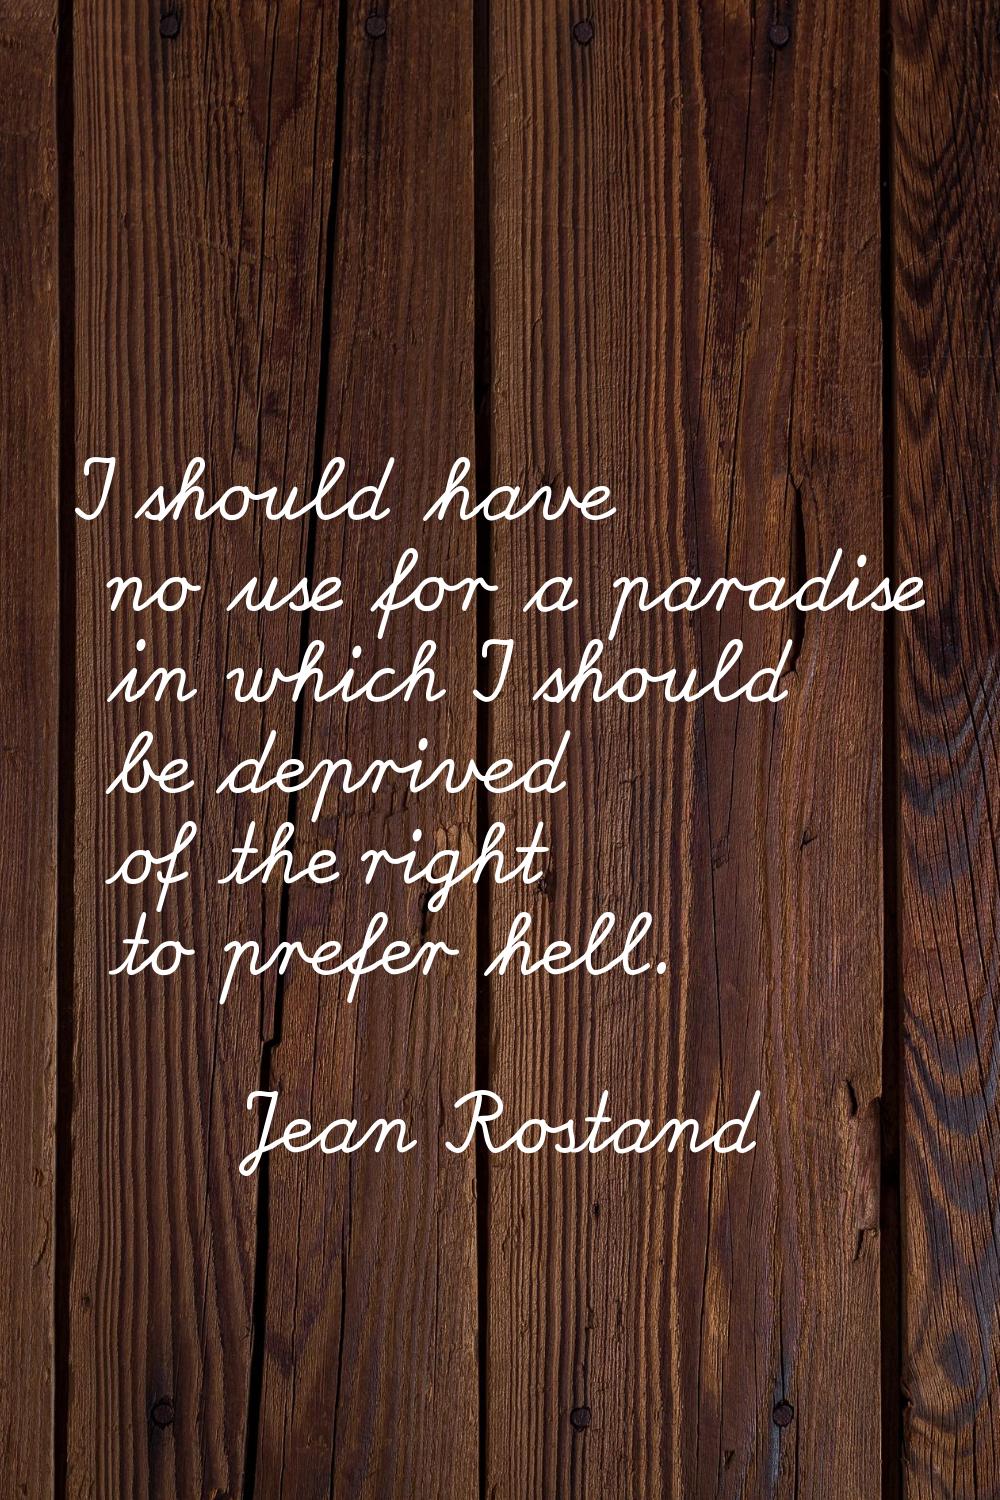 I should have no use for a paradise in which I should be deprived of the right to prefer hell.